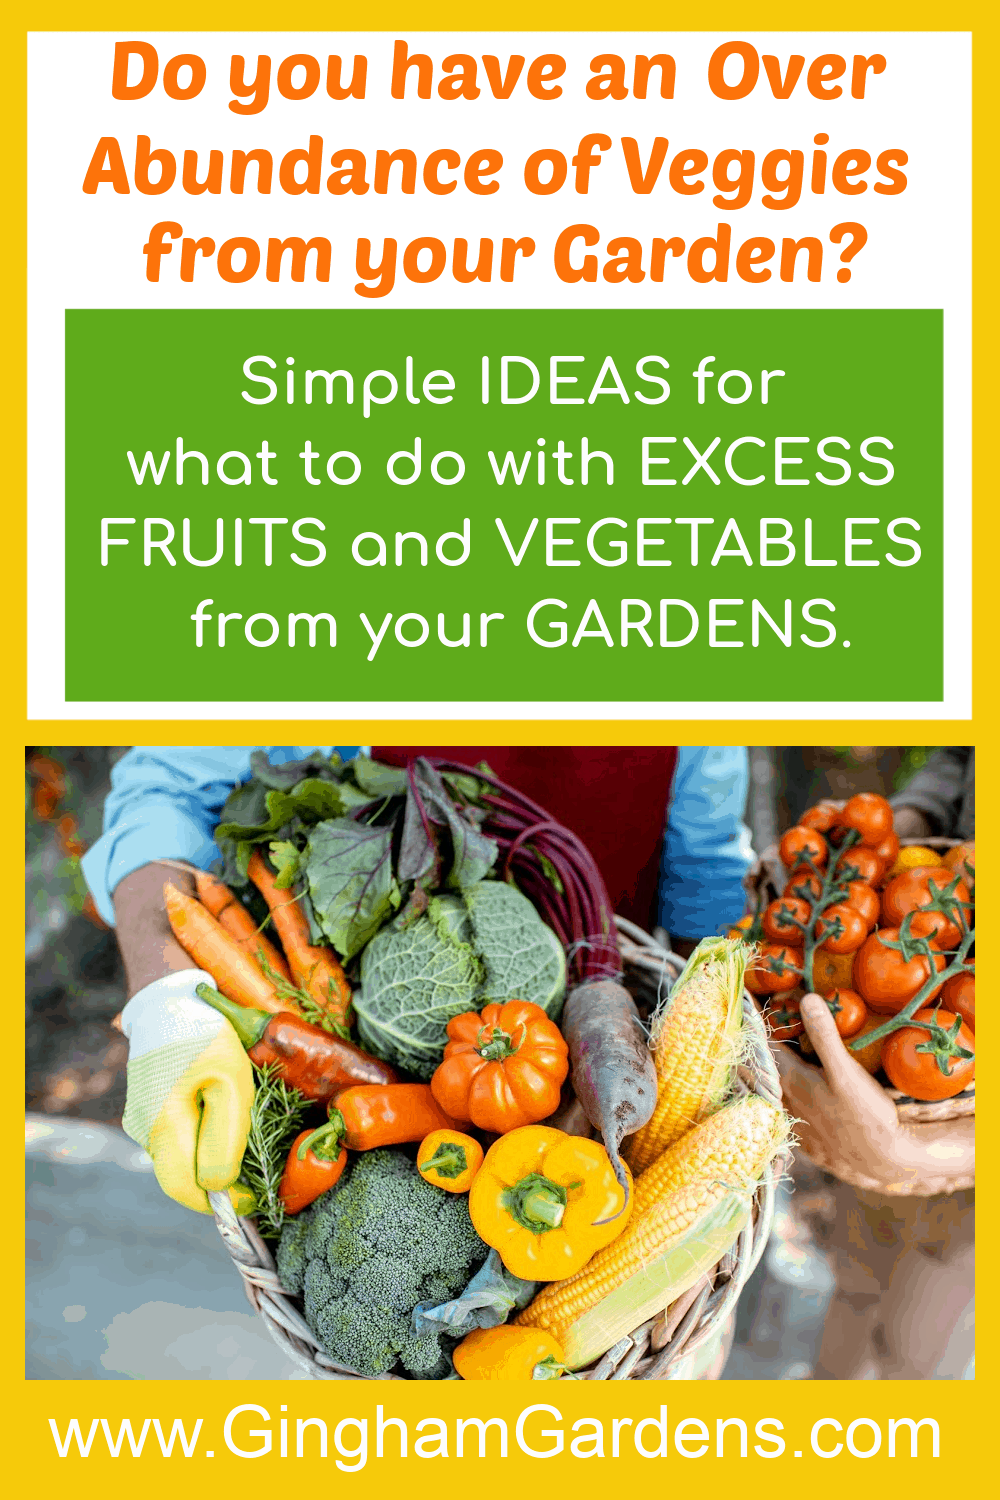 Image of Garden Produce with Text Overlay - What to do with excess fruits and vegetables from your gardens.